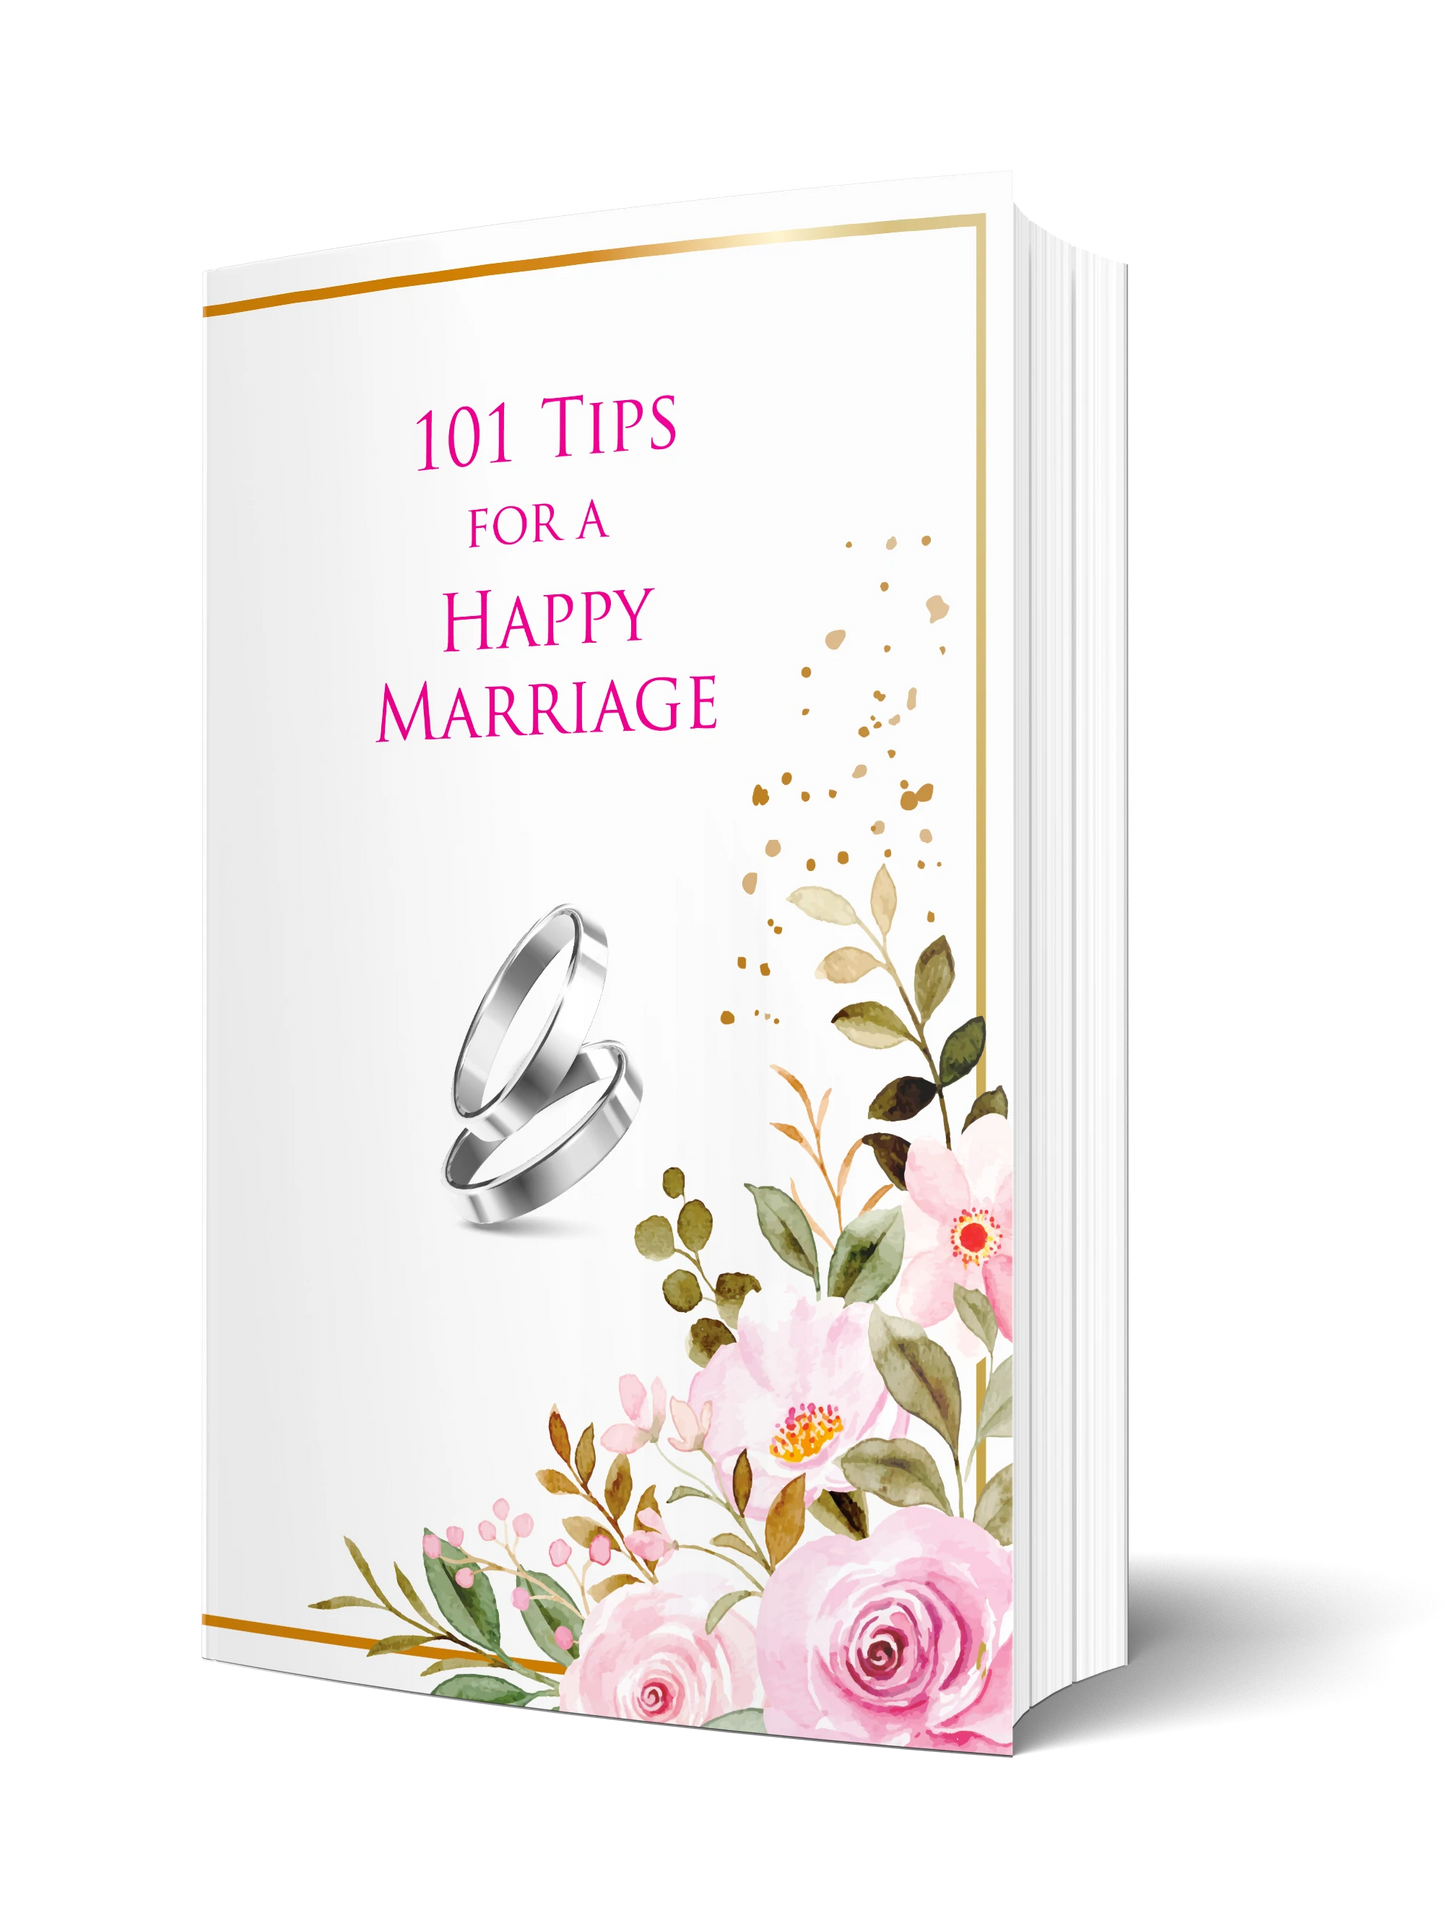 101 Tips for a Happy Marriage